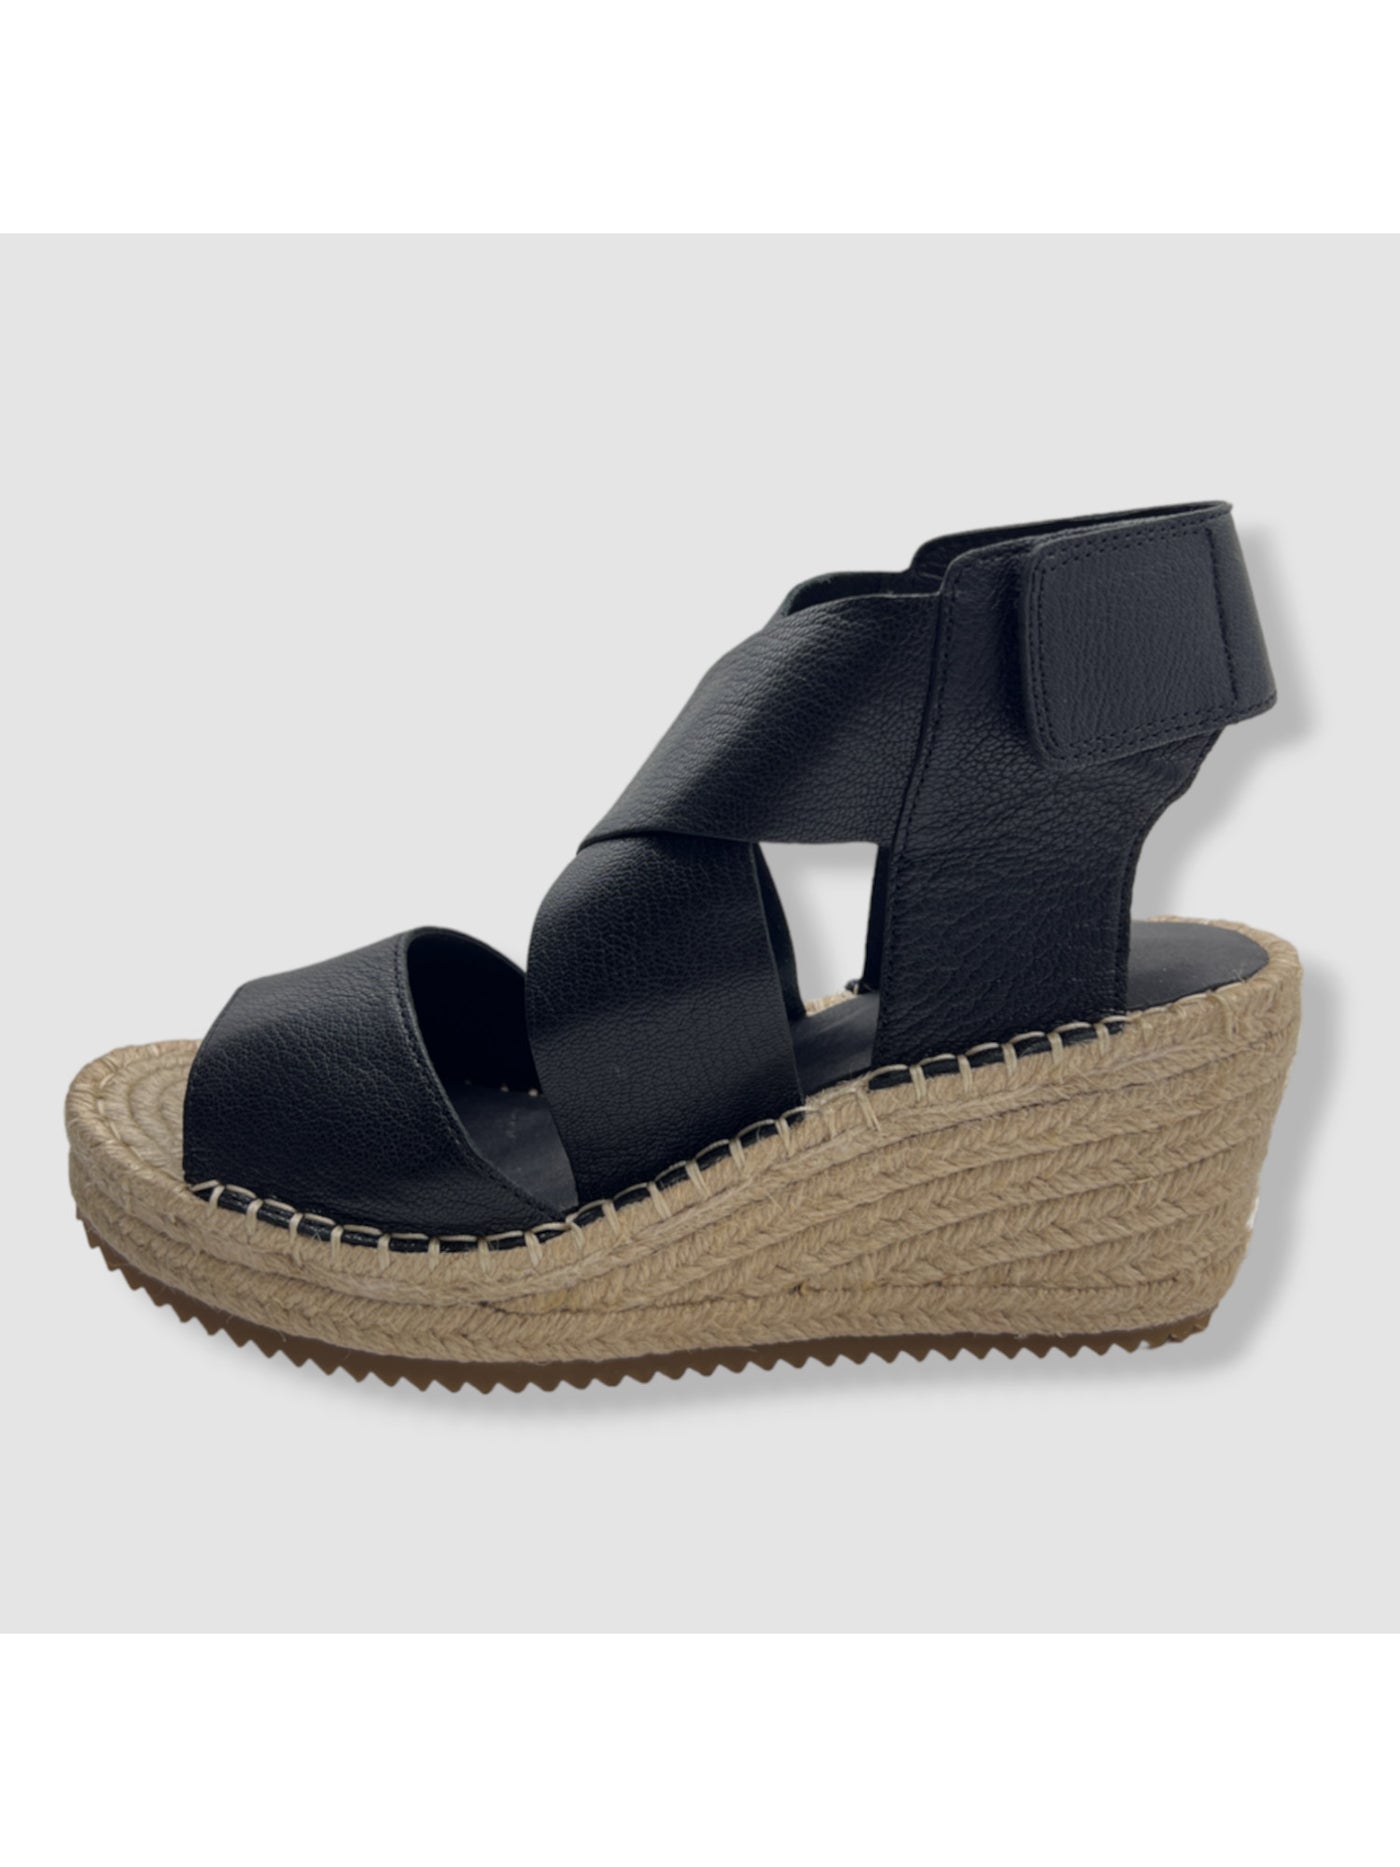 EILEEN FISHER Womens Black 1" Platform Crisscross Straps Sawtooth Sole Padded Willow Open Toe Wedge Leather Espadrille Shoes 7 M